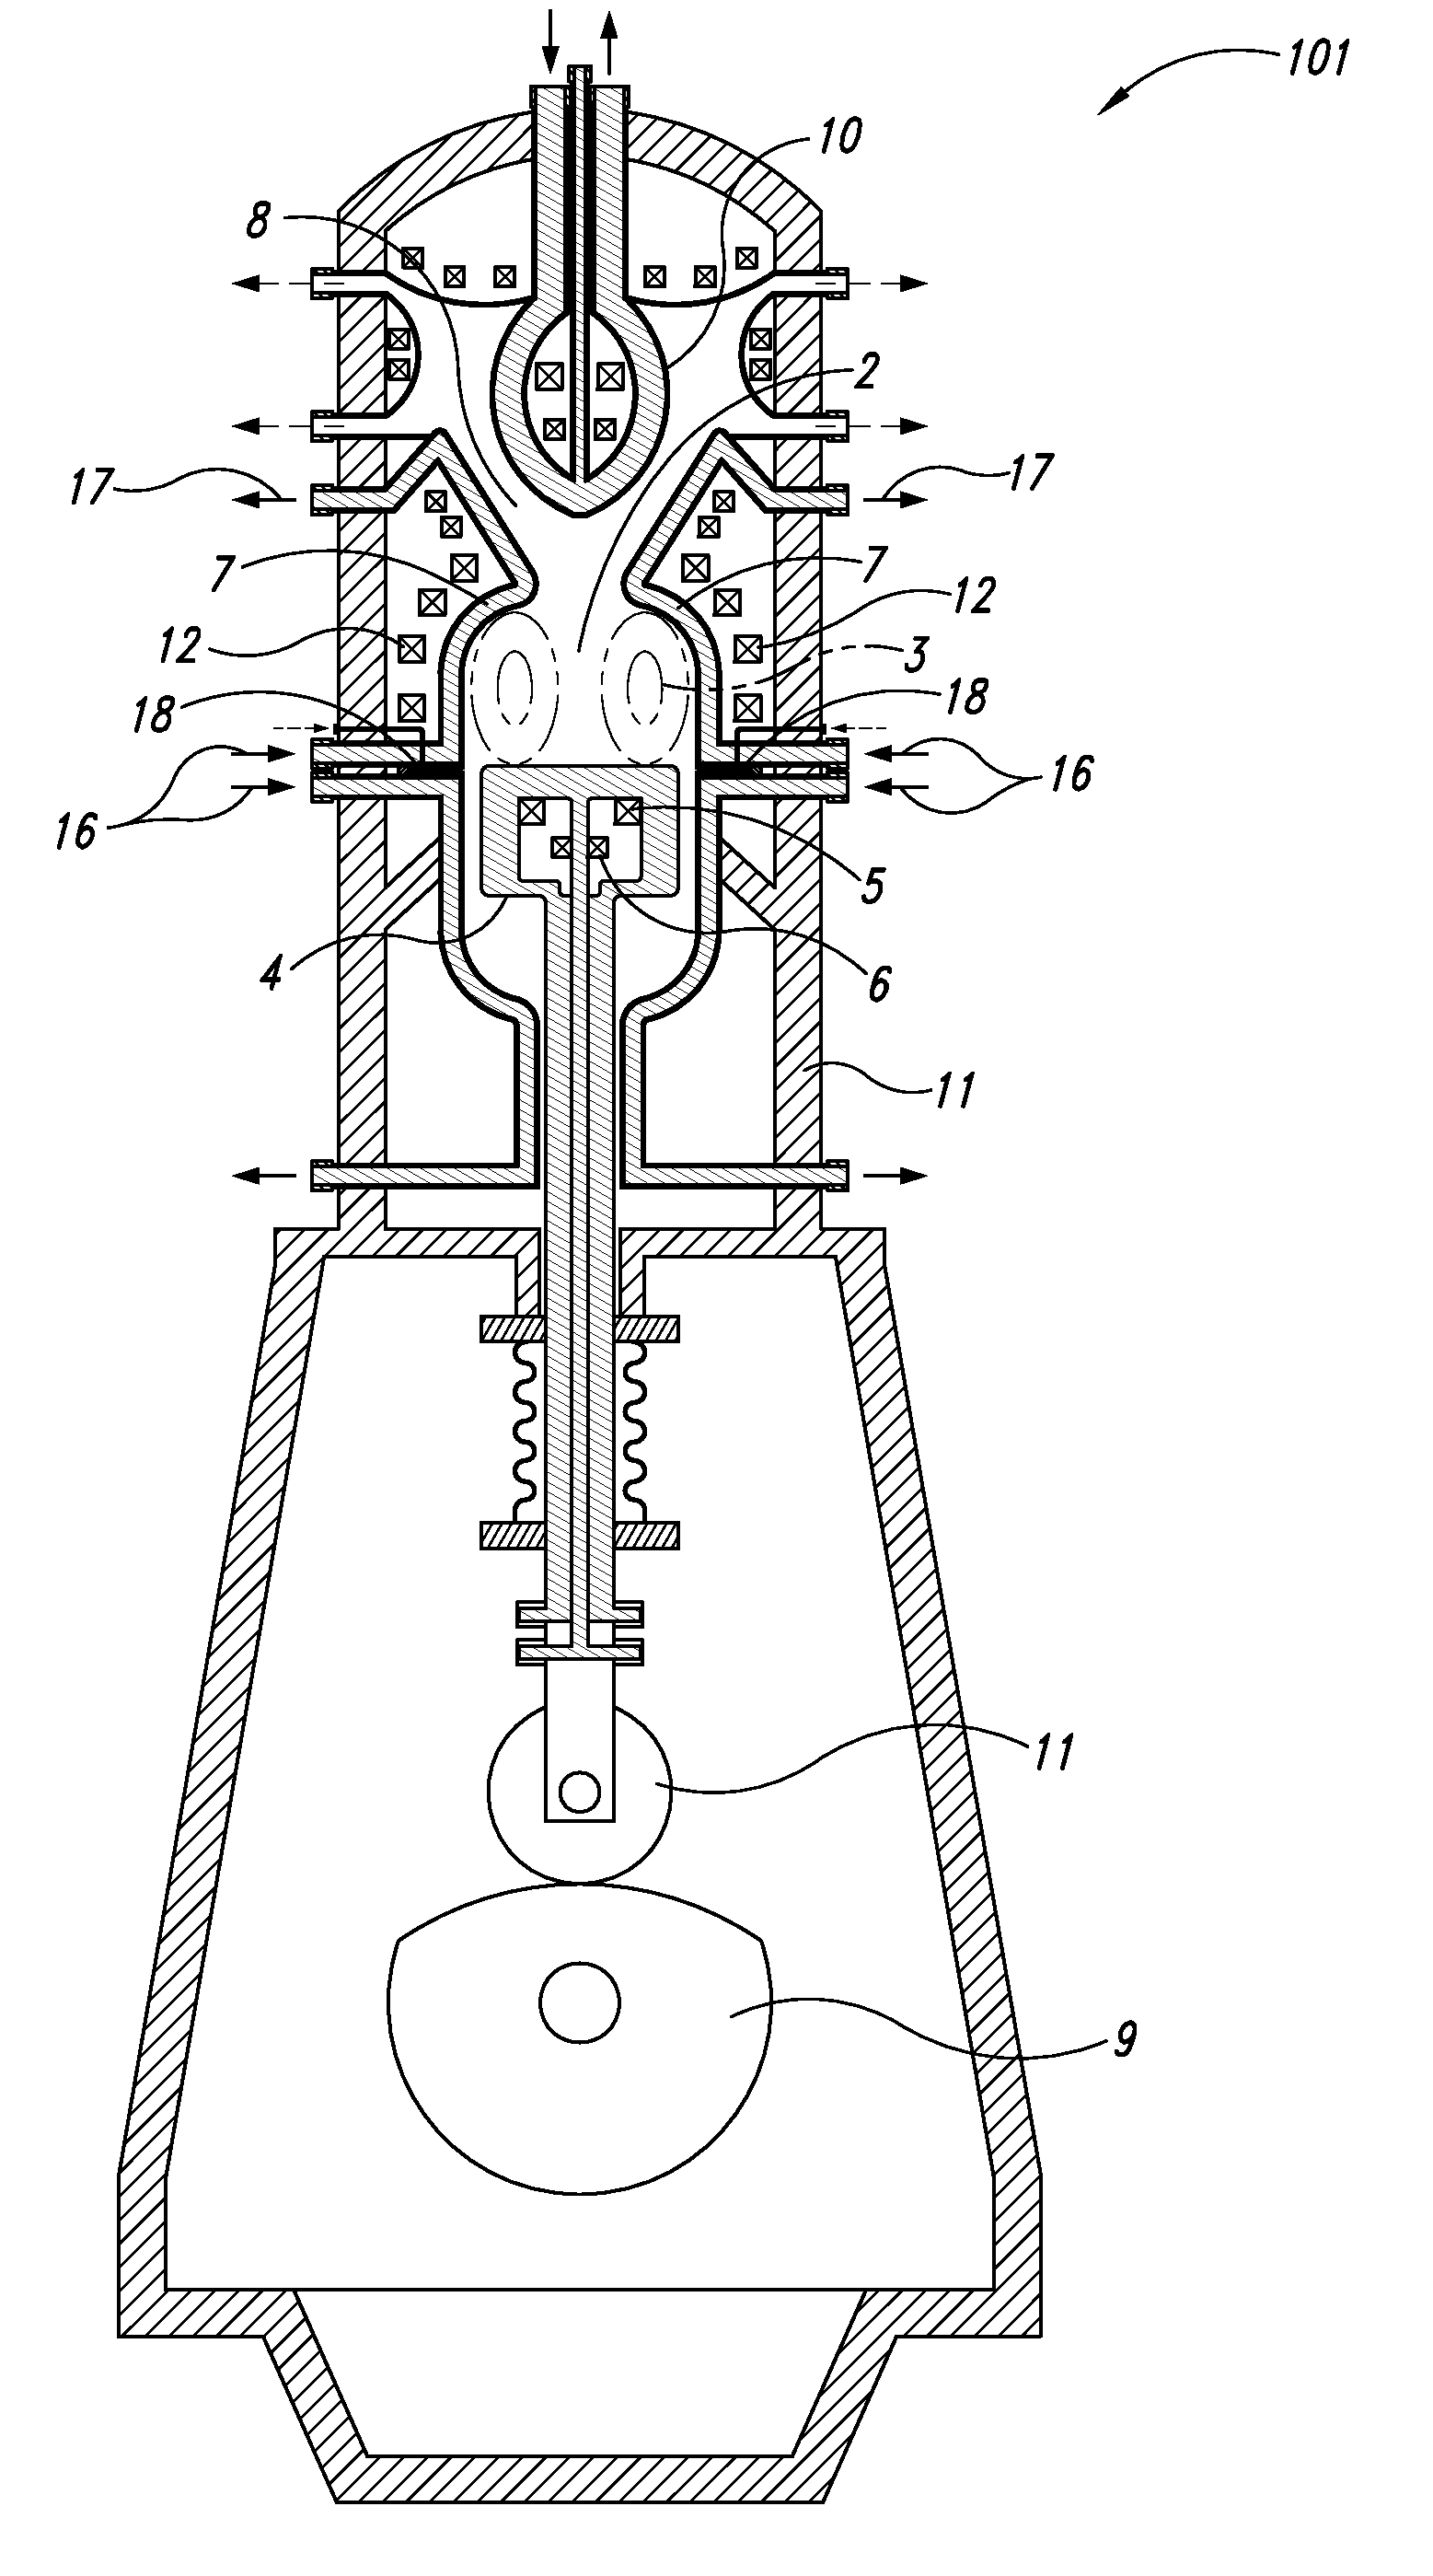 Device for compressing a compact toroidal plasma for use as a neutron source and fusion reactor